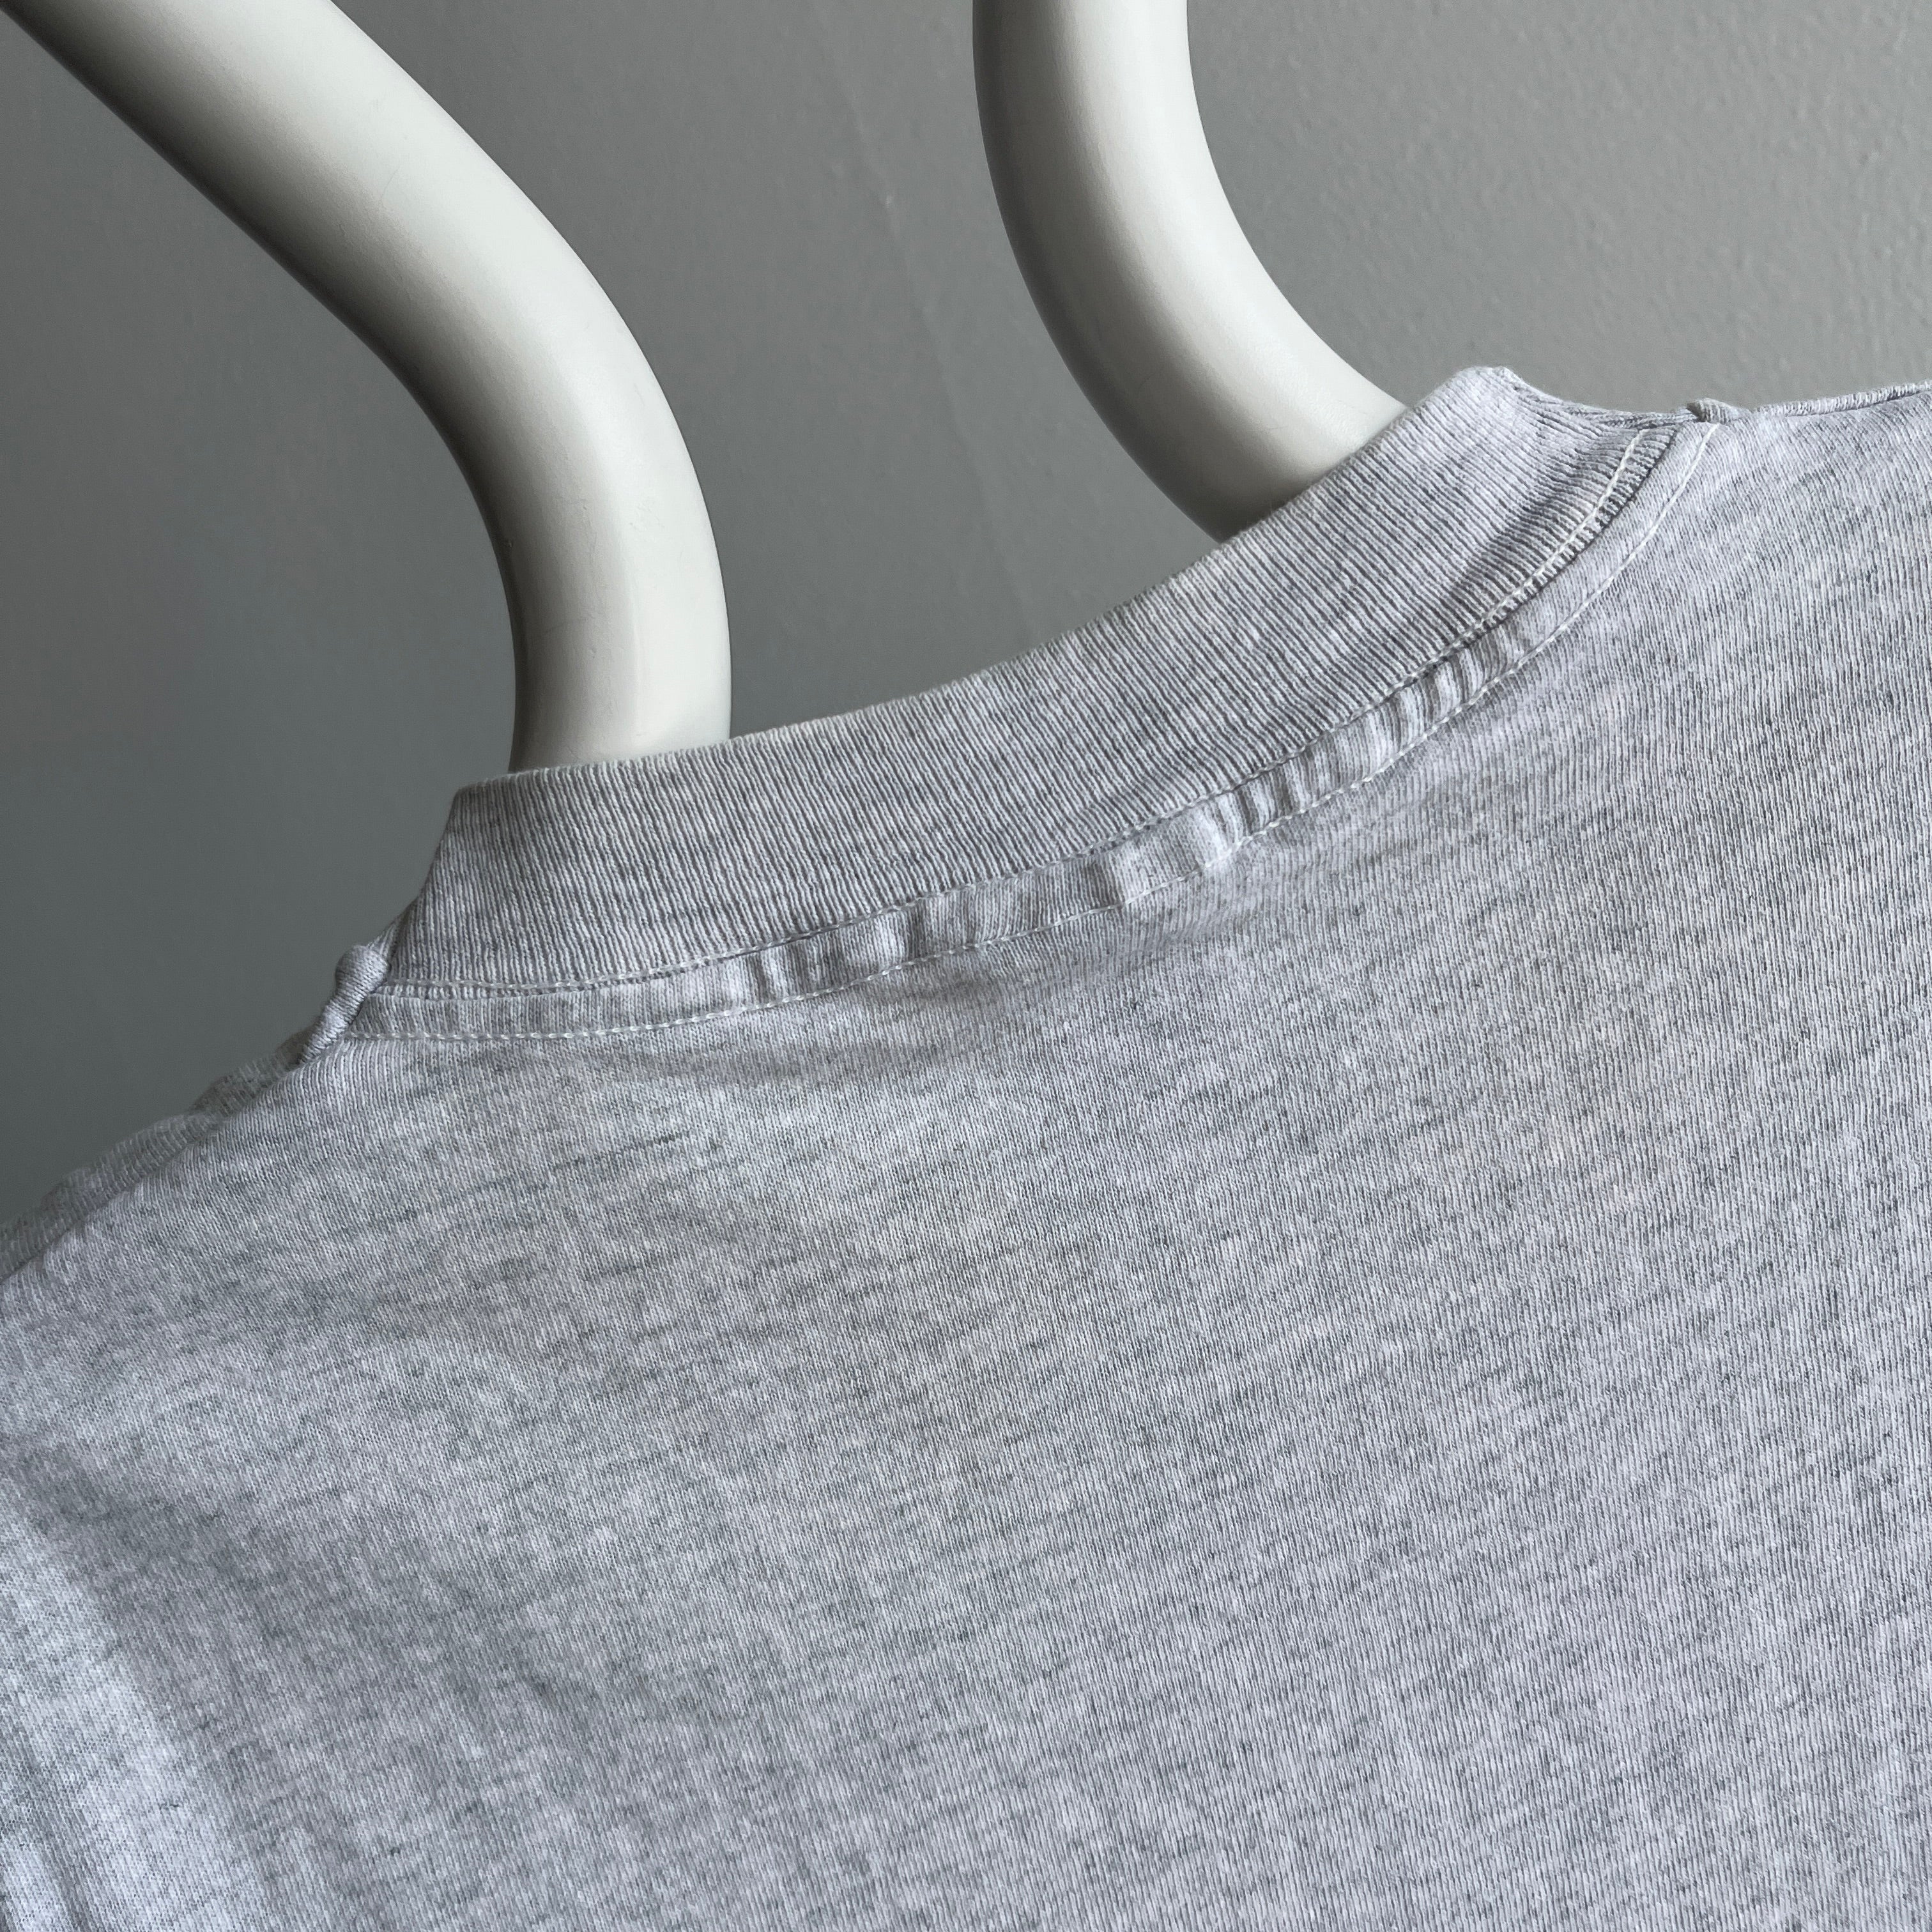 1980s Soft and Worn Light Gray Cotton Muscle Tank by FOTL